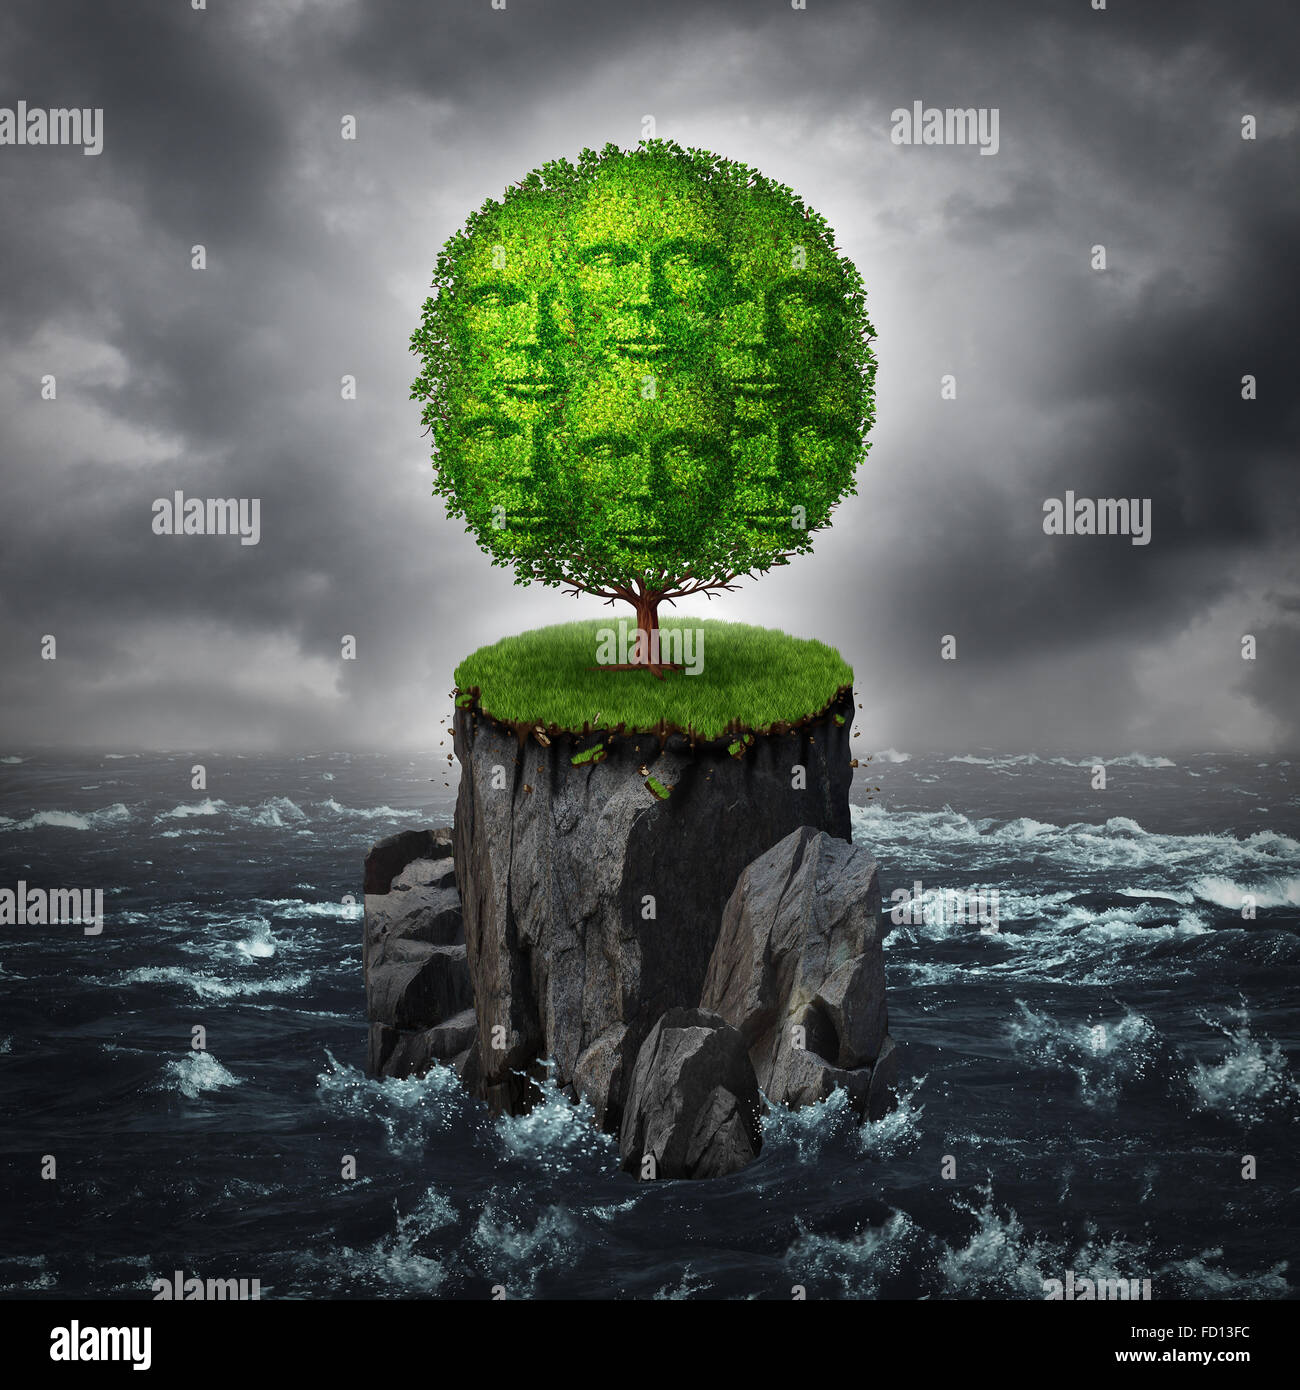 Community isolation concept as a a group of people shaped as a tree growing on an isolated rock cliff island surrounded by ocean as a metaphor for abandoned and forgotten society or living off the grid with limited access. Stock Photo